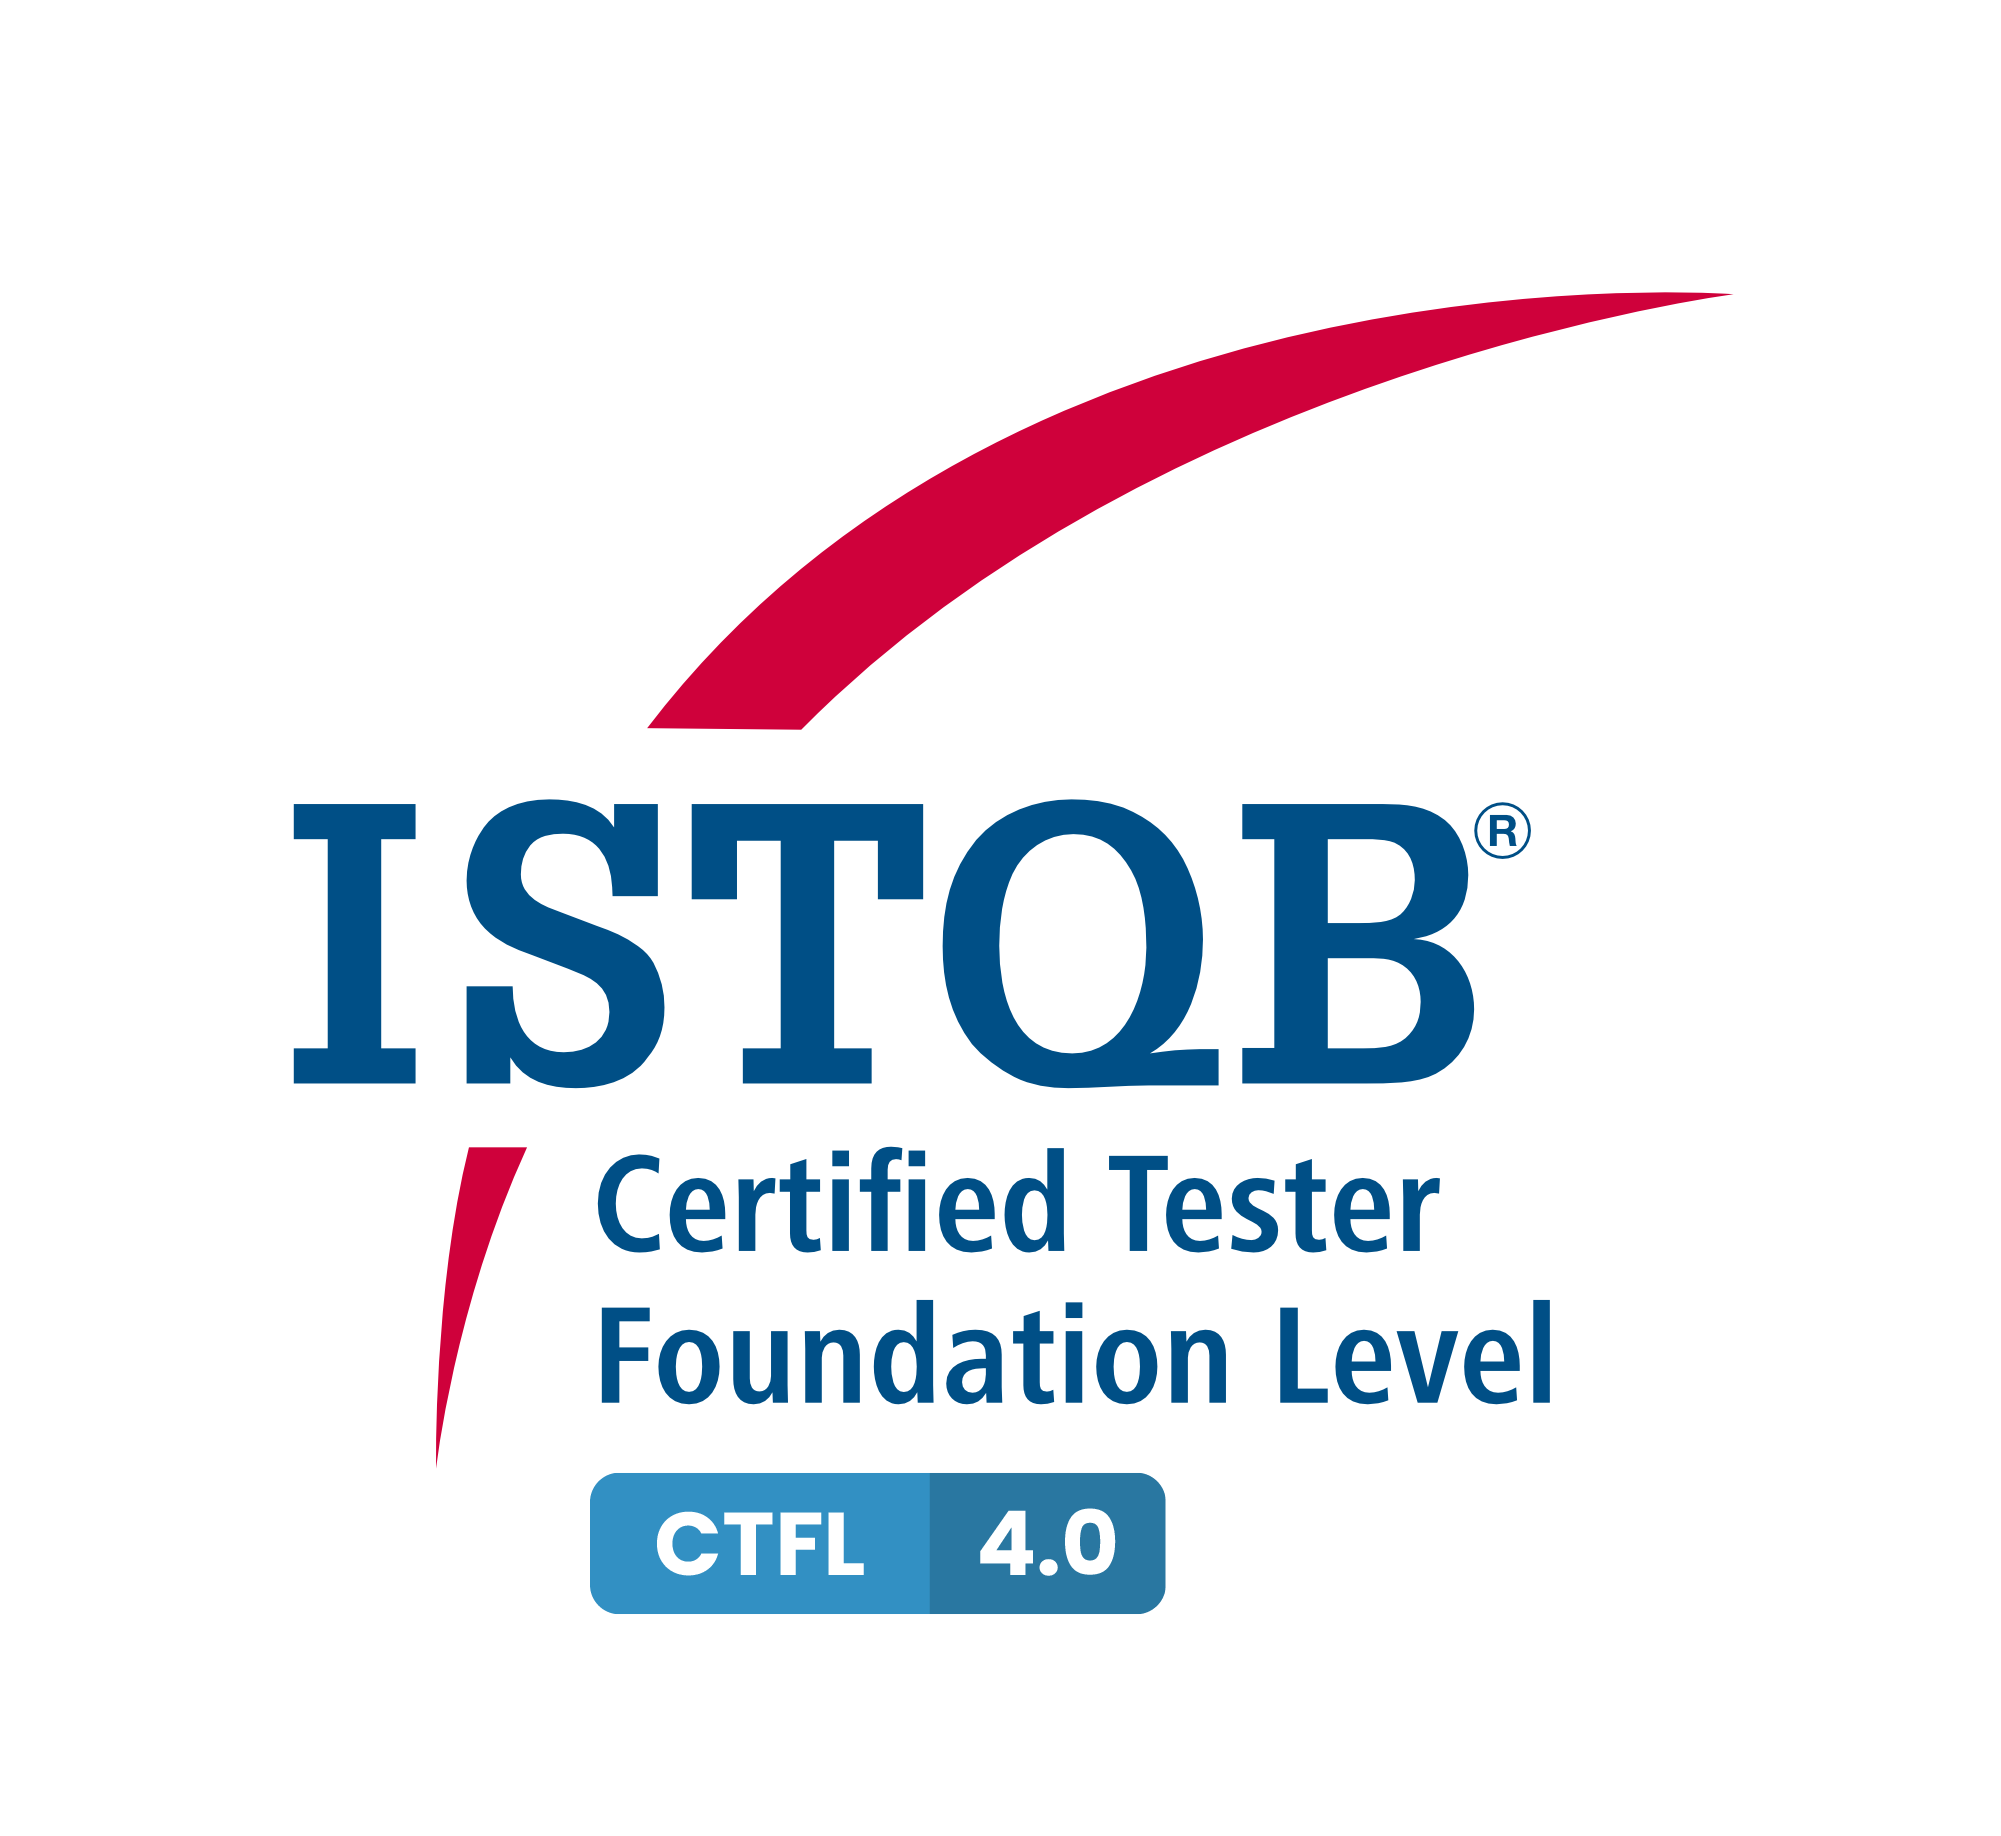 ISTQB Certified Tester Foundation Level version 4.0